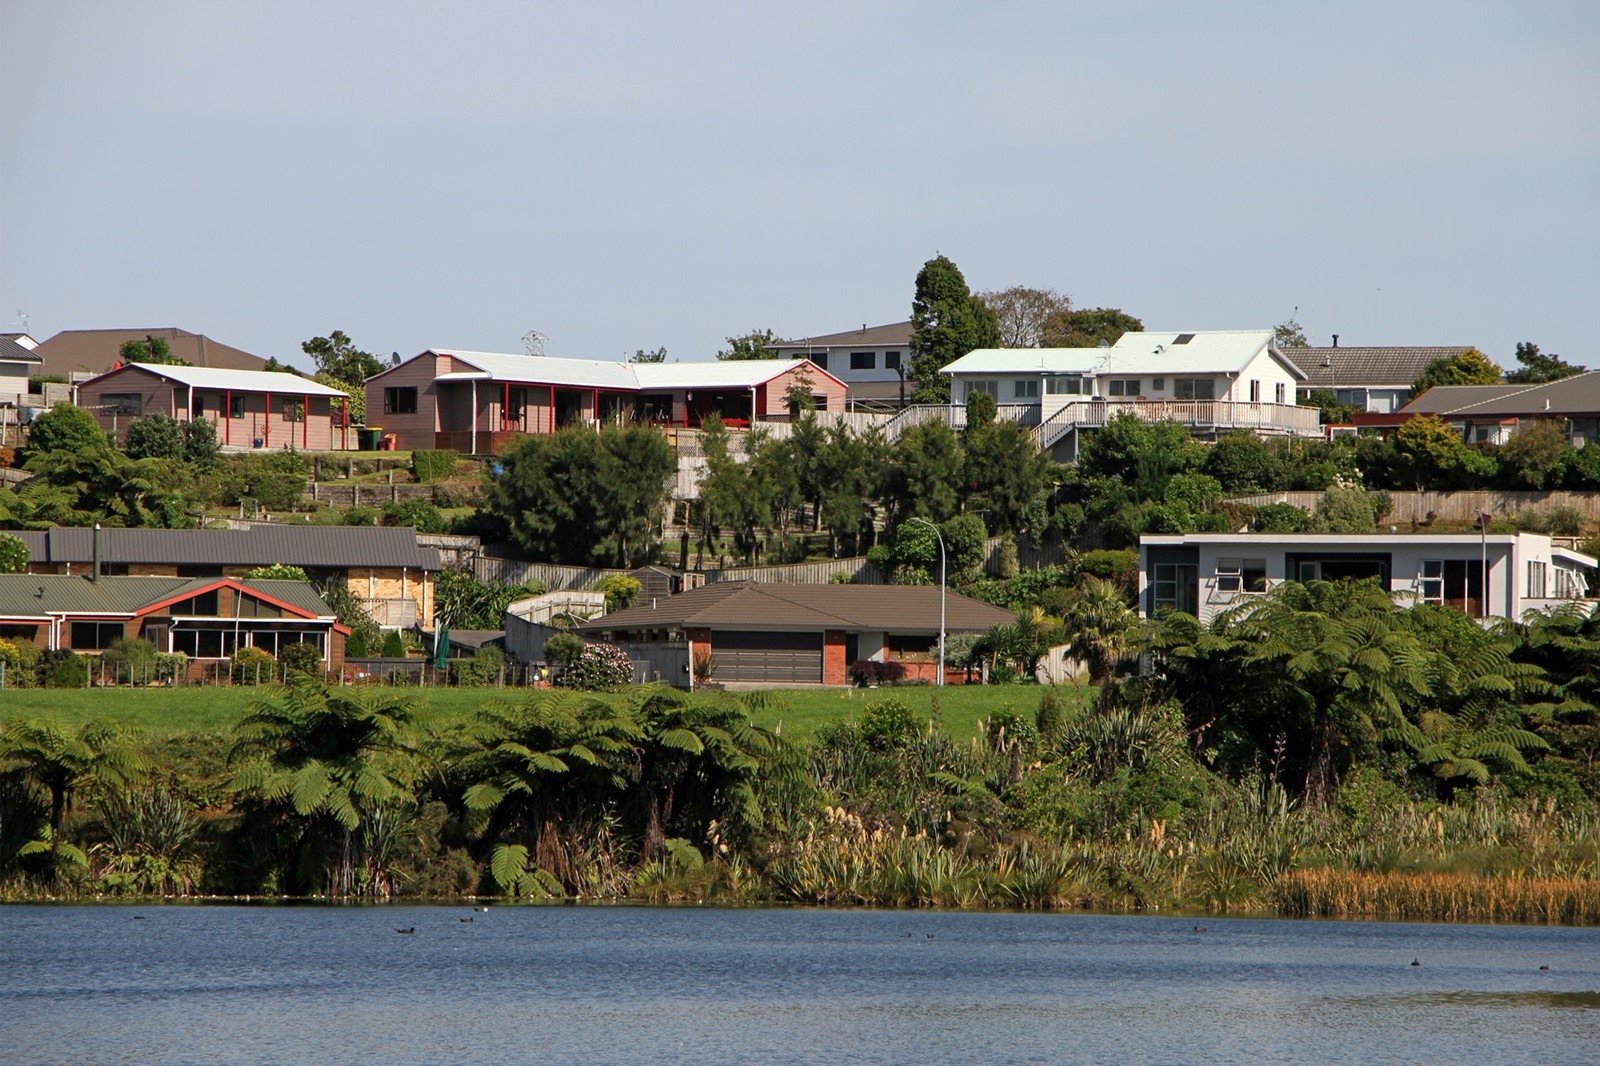 New Plymouth houses